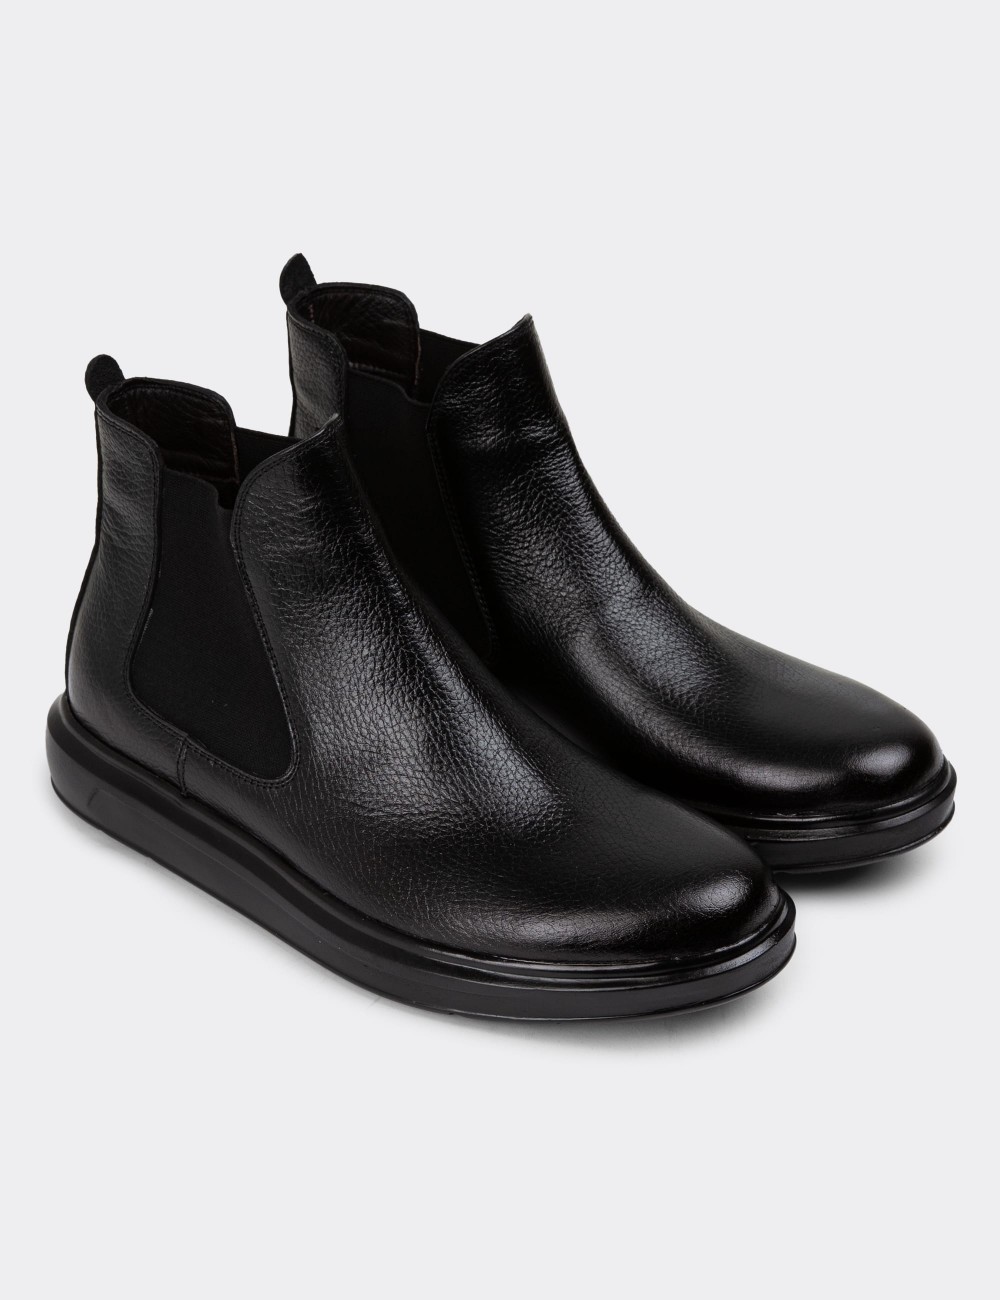 Black Leather Chelsea Boots - 01620MSYHP06